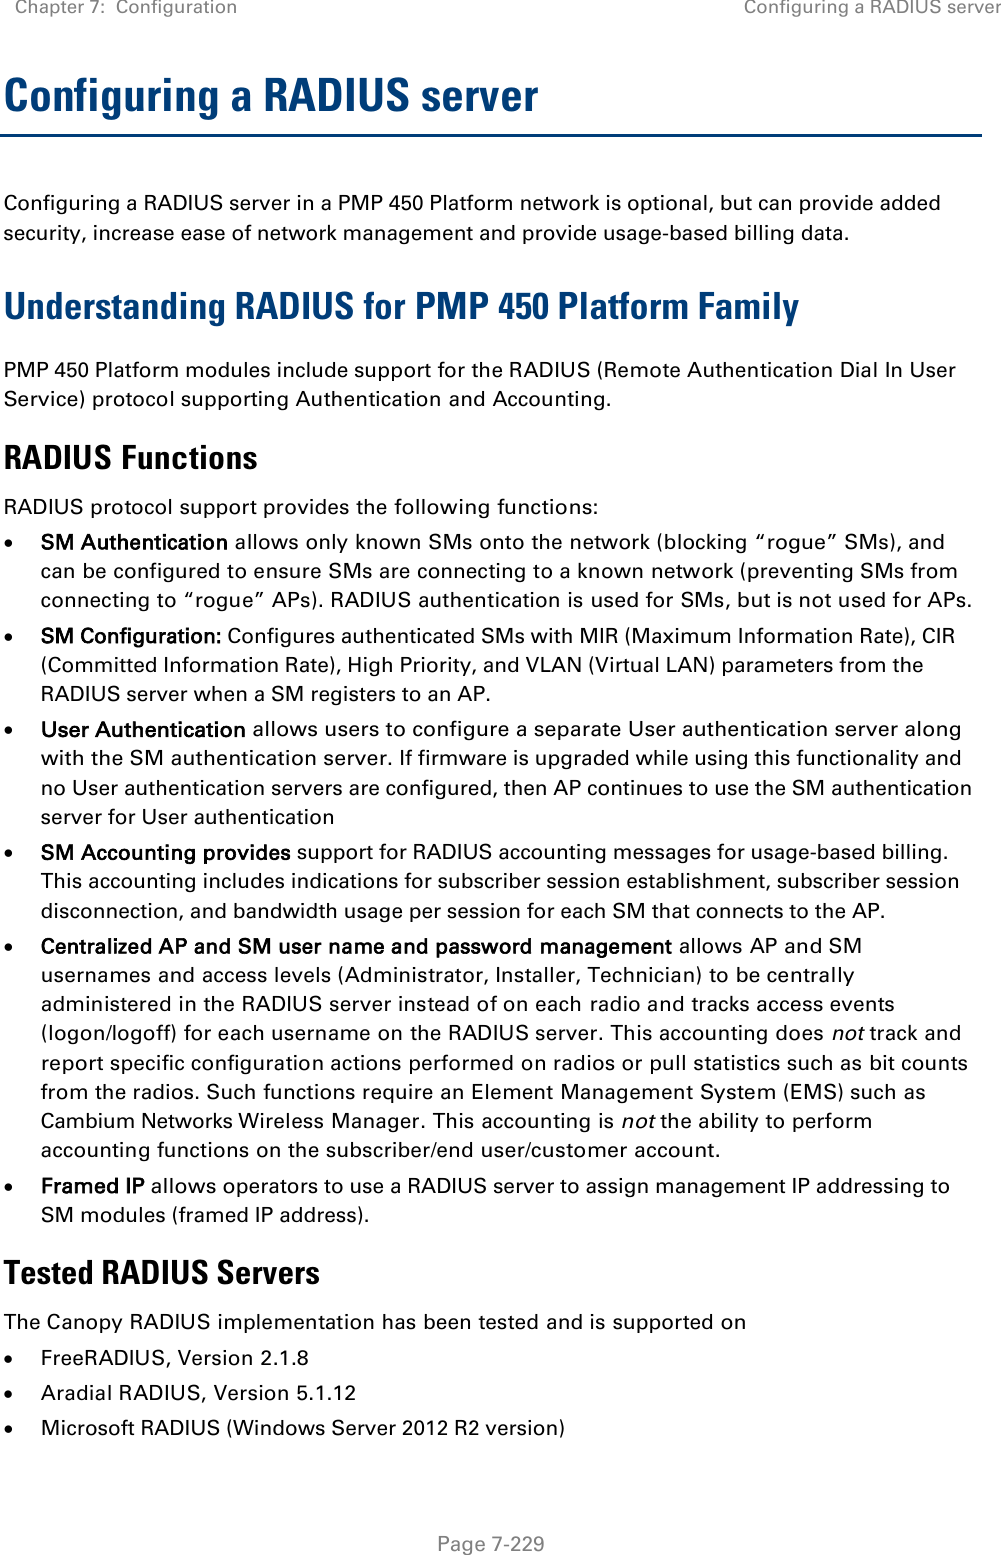 Chapter 7:  Configuration Configuring a RADIUS server   Page 7-229 Configuring a RADIUS server Configuring a RADIUS server in a PMP 450 Platform network is optional, but can provide added security, increase ease of network management and provide usage-based billing data. Understanding RADIUS for PMP 450 Platform Family PMP 450 Platform modules include support for the RADIUS (Remote Authentication Dial In User Service) protocol supporting Authentication and Accounting. RADIUS Functions RADIUS protocol support provides the following functions: • SM Authentication allows only known SMs onto the network (blocking “rogue” SMs), and can be configured to ensure SMs are connecting to a known network (preventing SMs from connecting to “rogue” APs). RADIUS authentication is used for SMs, but is not used for APs. • SM Configuration: Configures authenticated SMs with MIR (Maximum Information Rate), CIR (Committed Information Rate), High Priority, and VLAN (Virtual LAN) parameters from the RADIUS server when a SM registers to an AP.  • User Authentication allows users to configure a separate User authentication server along with the SM authentication server. If firmware is upgraded while using this functionality and no User authentication servers are configured, then AP continues to use the SM authentication server for User authentication • SM Accounting provides support for RADIUS accounting messages for usage-based billing. This accounting includes indications for subscriber session establishment, subscriber session disconnection, and bandwidth usage per session for each SM that connects to the AP.  • Centralized AP and SM user name and password management allows AP and SM usernames and access levels (Administrator, Installer, Technician) to be centrally administered in the RADIUS server instead of on each radio and tracks access events (logon/logoff) for each username on the RADIUS server. This accounting does not track and report specific configuration actions performed on radios or pull statistics such as bit counts from the radios. Such functions require an Element Management System (EMS) such as Cambium Networks Wireless Manager. This accounting is not the ability to perform accounting functions on the subscriber/end user/customer account. • Framed IP allows operators to use a RADIUS server to assign management IP addressing to SM modules (framed IP address). Tested RADIUS Servers The Canopy RADIUS implementation has been tested and is supported on • FreeRADIUS, Version 2.1.8 • Aradial RADIUS, Version 5.1.12 • Microsoft RADIUS (Windows Server 2012 R2 version)  